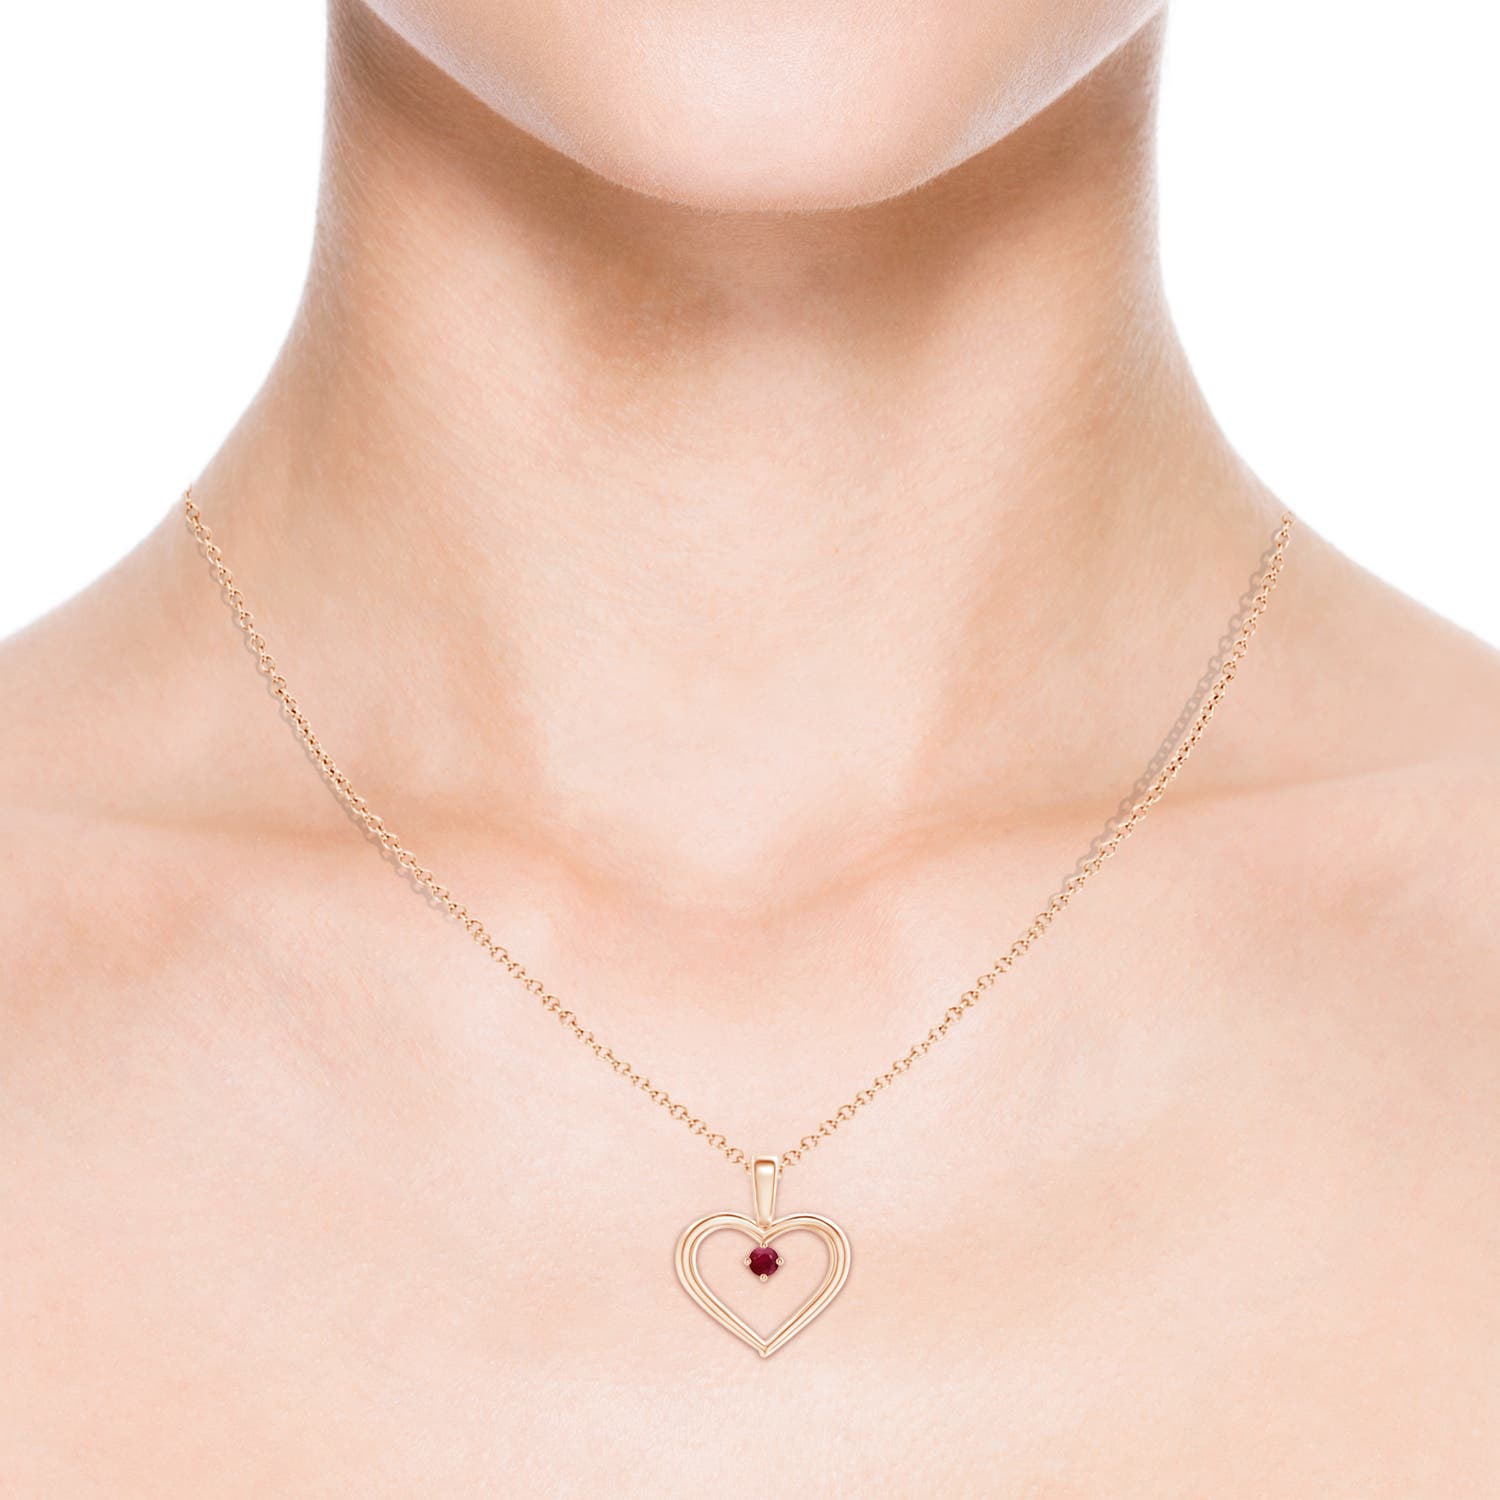 A - Ruby / 0.09 CT / 14 KT Rose Gold